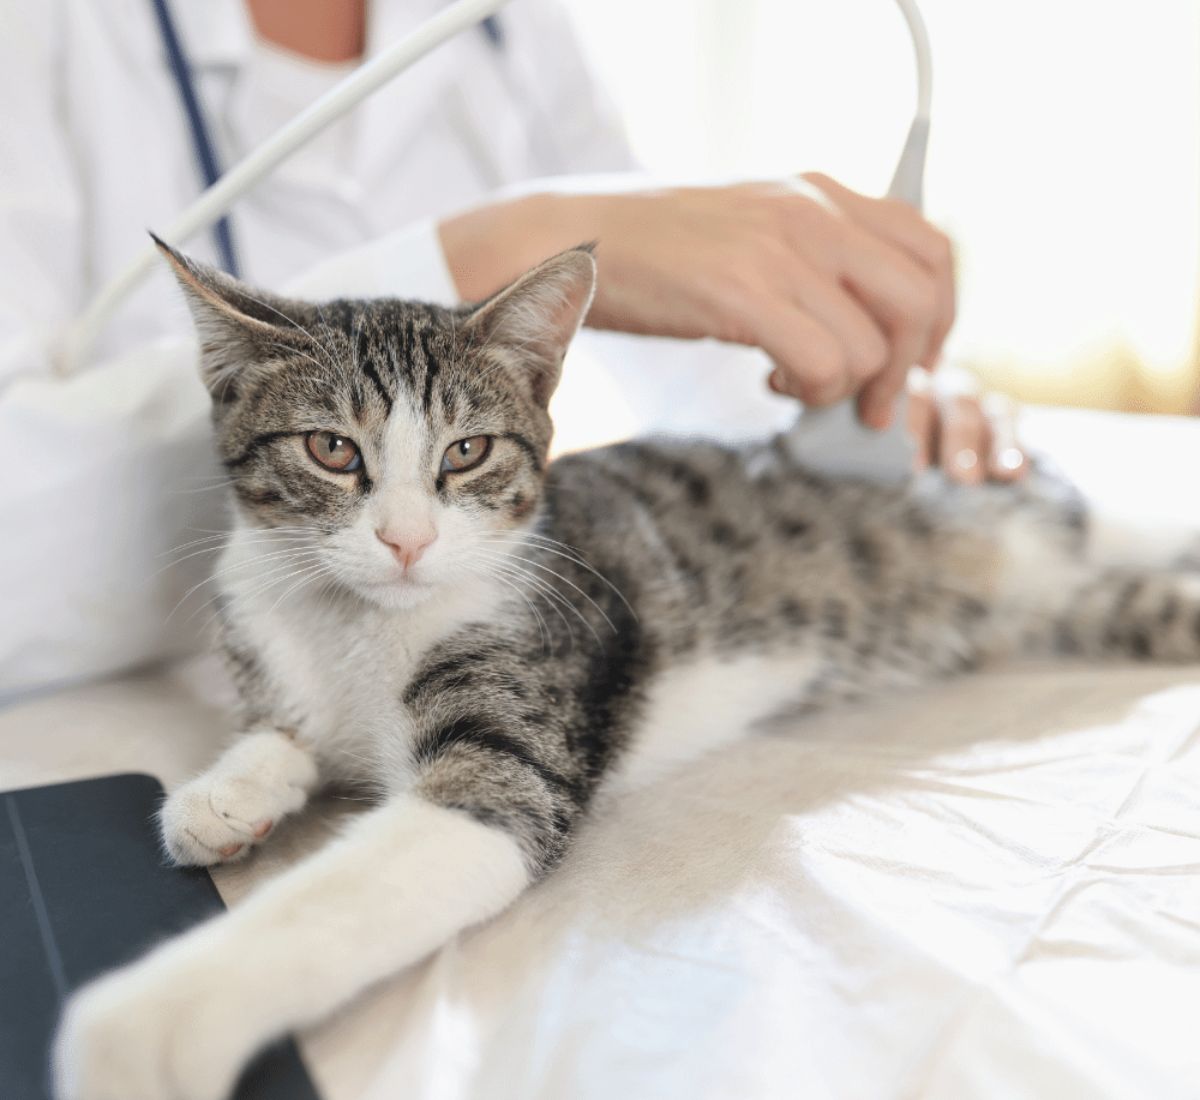 Ultrasound scan for adult cat